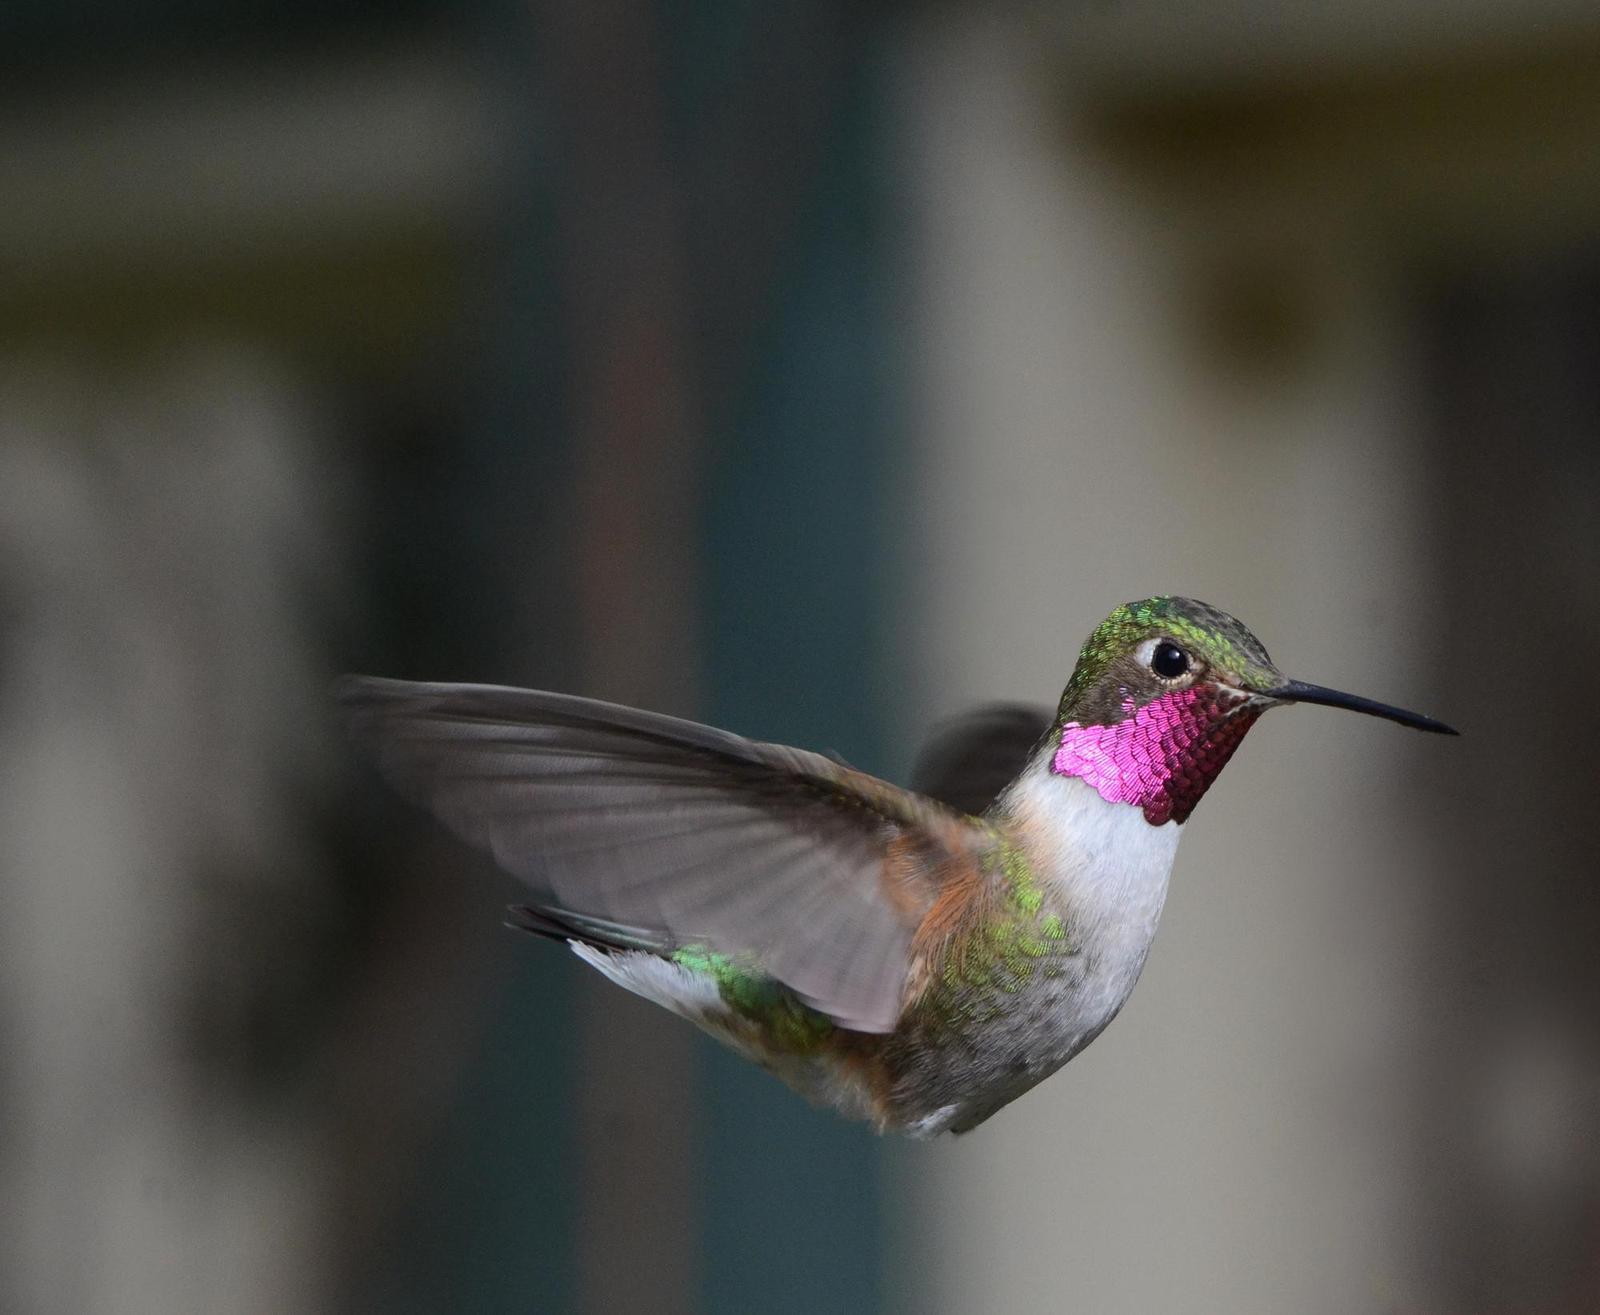 Broad-tailed Hummingbird Photo by Steven Mlodinow